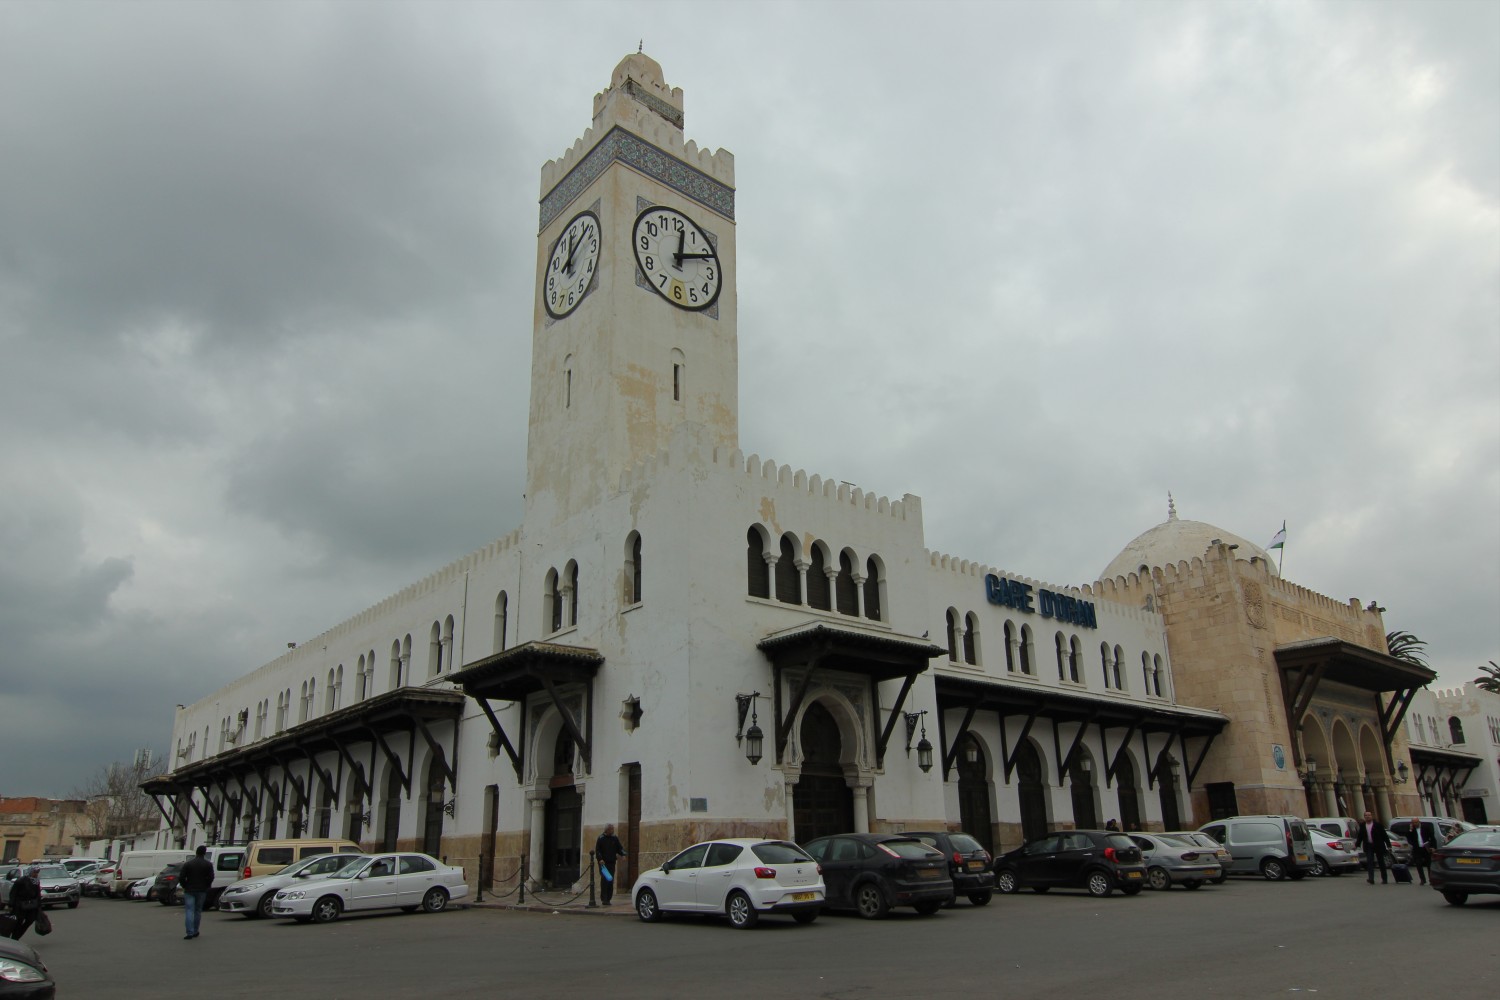 Angle viewpoint of the train station showing minaret-style clock tower